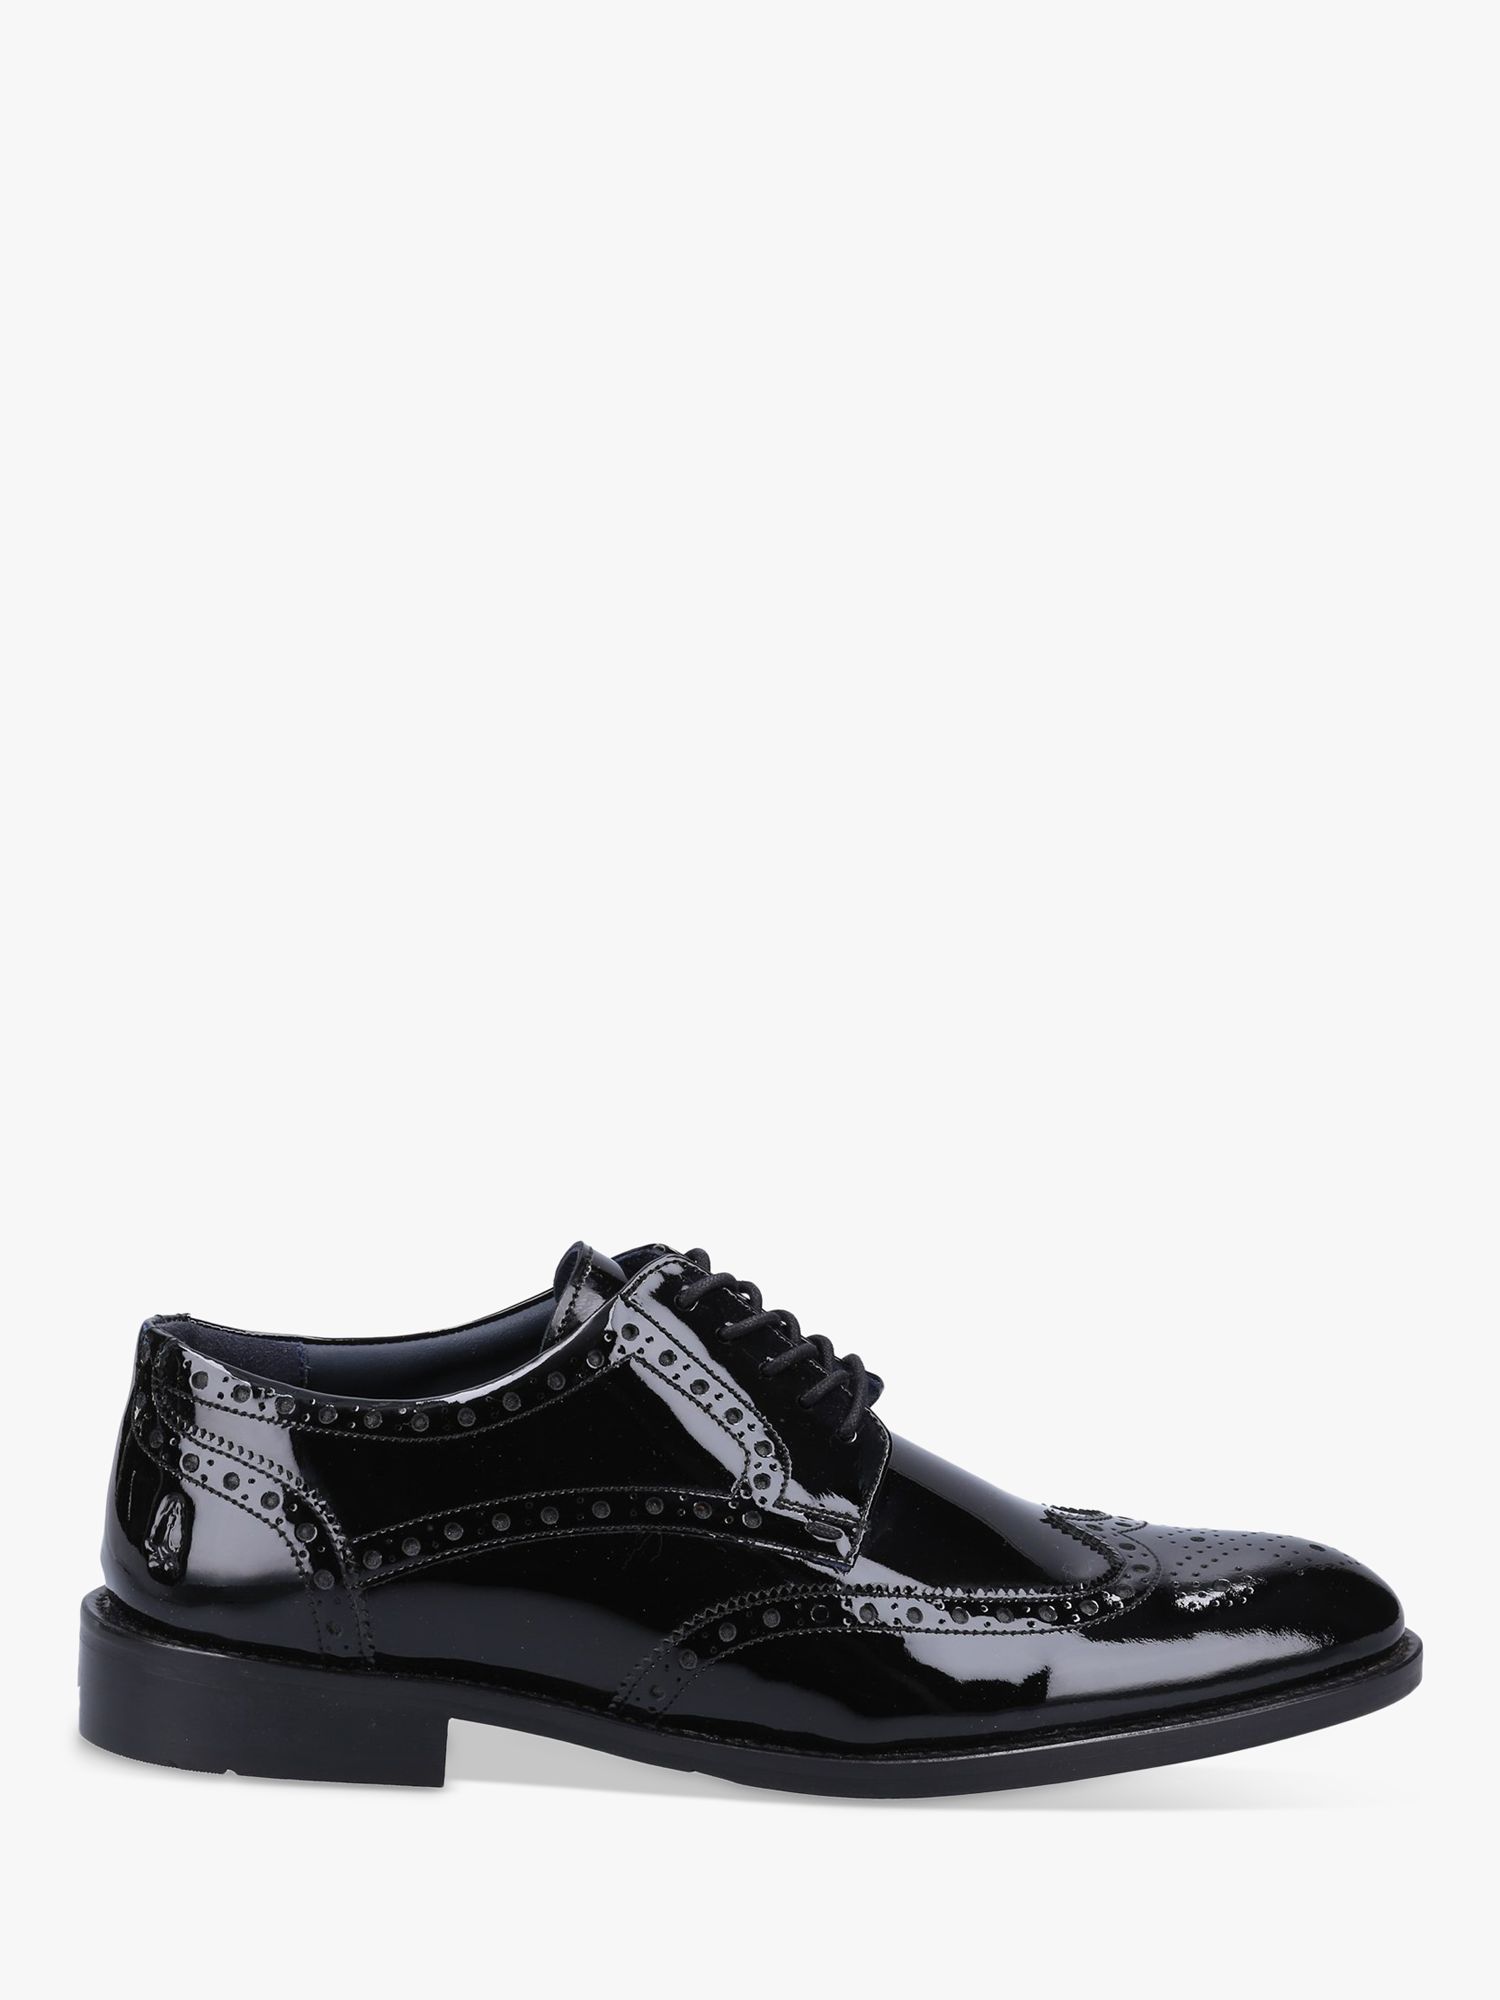 Hush Puppies Dustin Patent Leather Brogues, Black at John Lewis & Partners